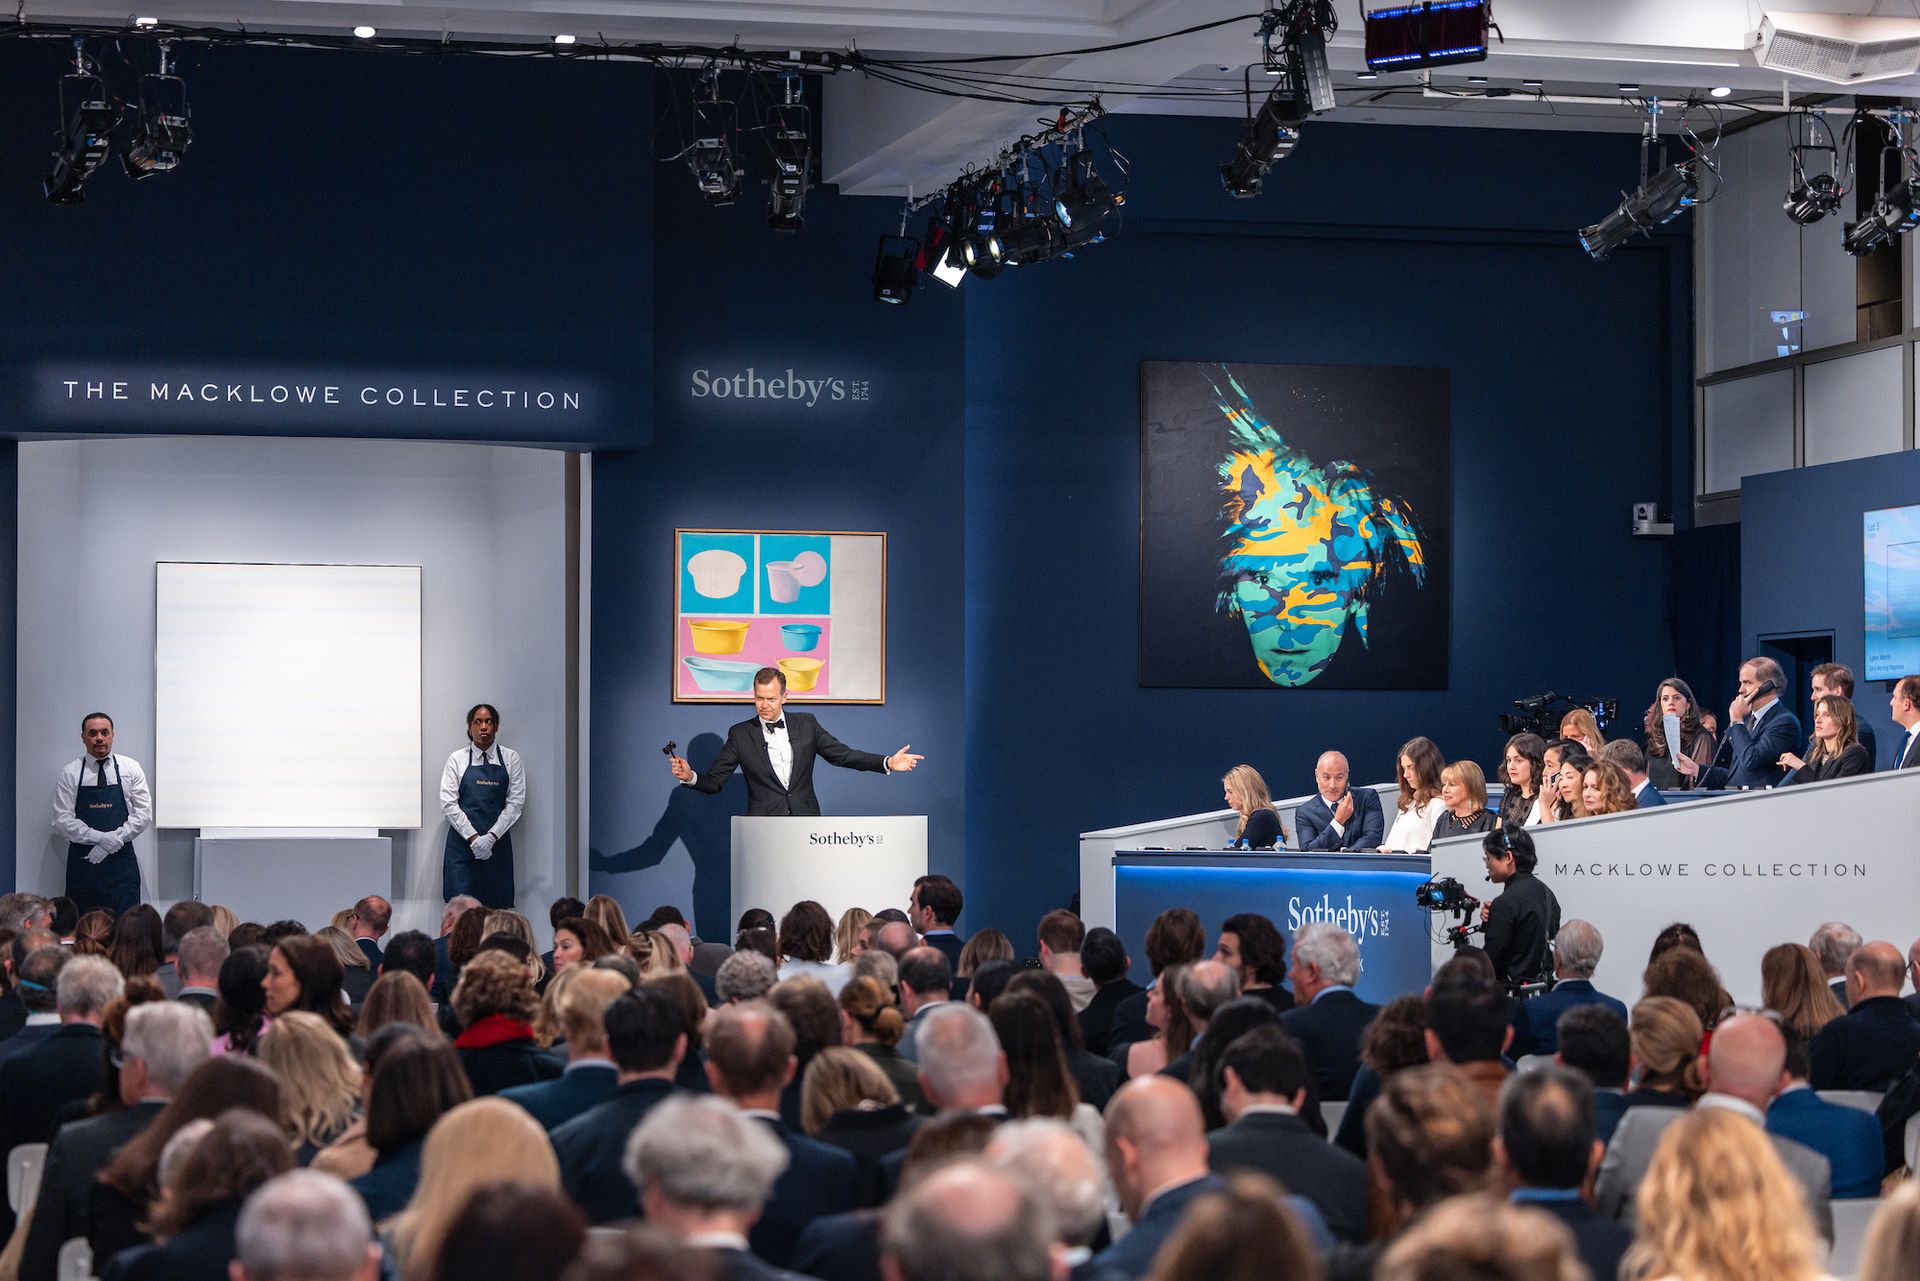 Oliver Barker conducts the second sale of works from the Macklowe Collection at Sotheby's New York on 16 May 2022 Photo courtesy Sotheby's, © Julian Cassady Photography